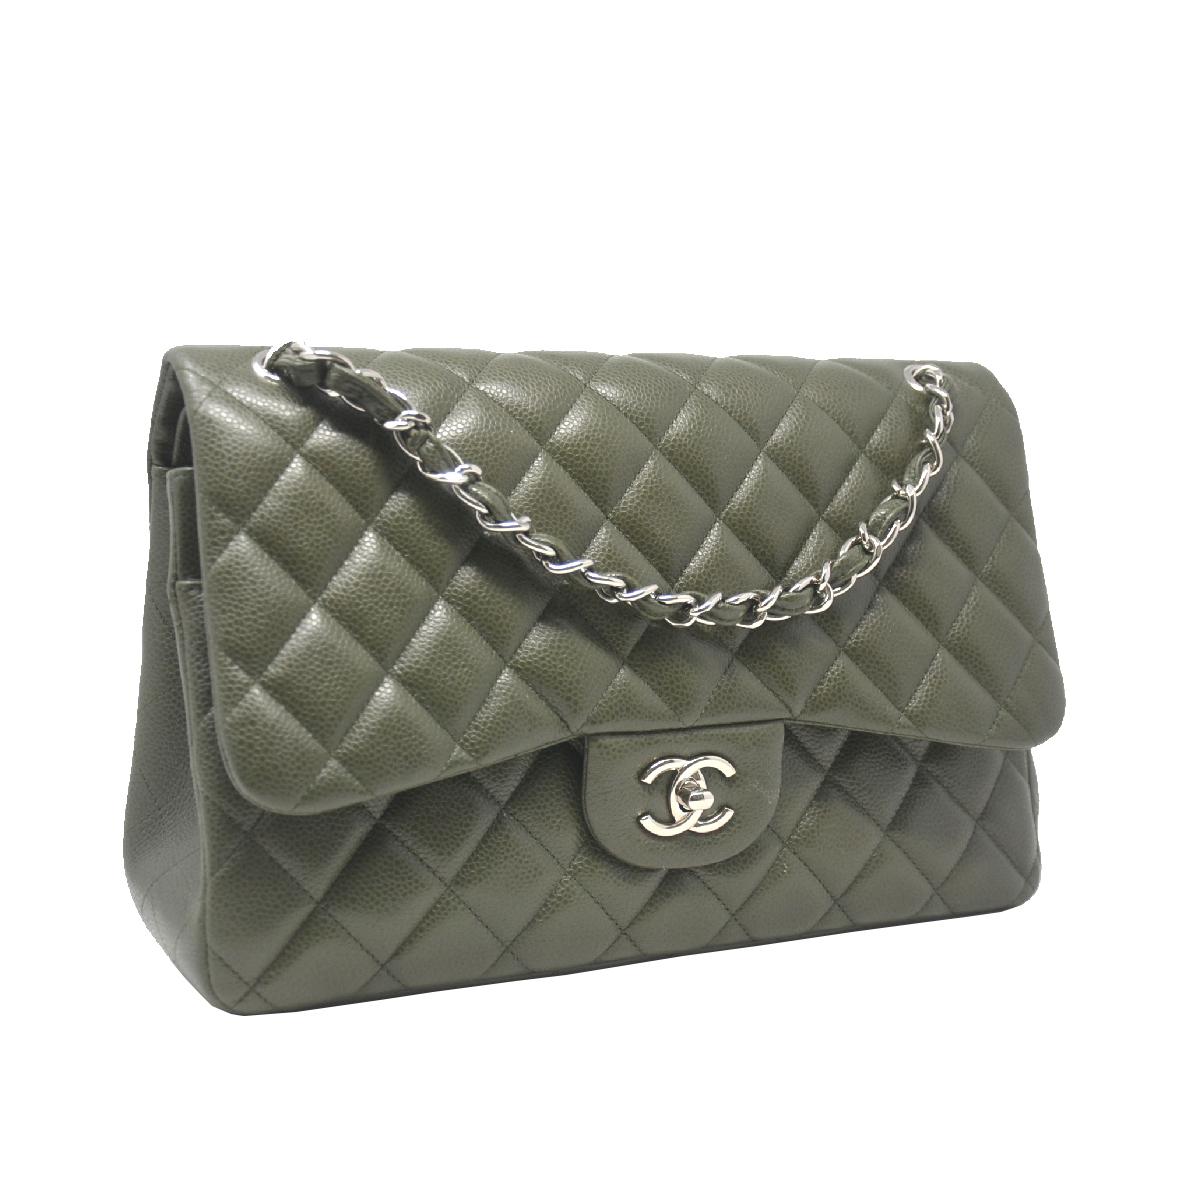 Company-Chanel
Model- Maxi Single Flap
Color-Black
Date Code-14899786
Material-Leather
Measurements-12